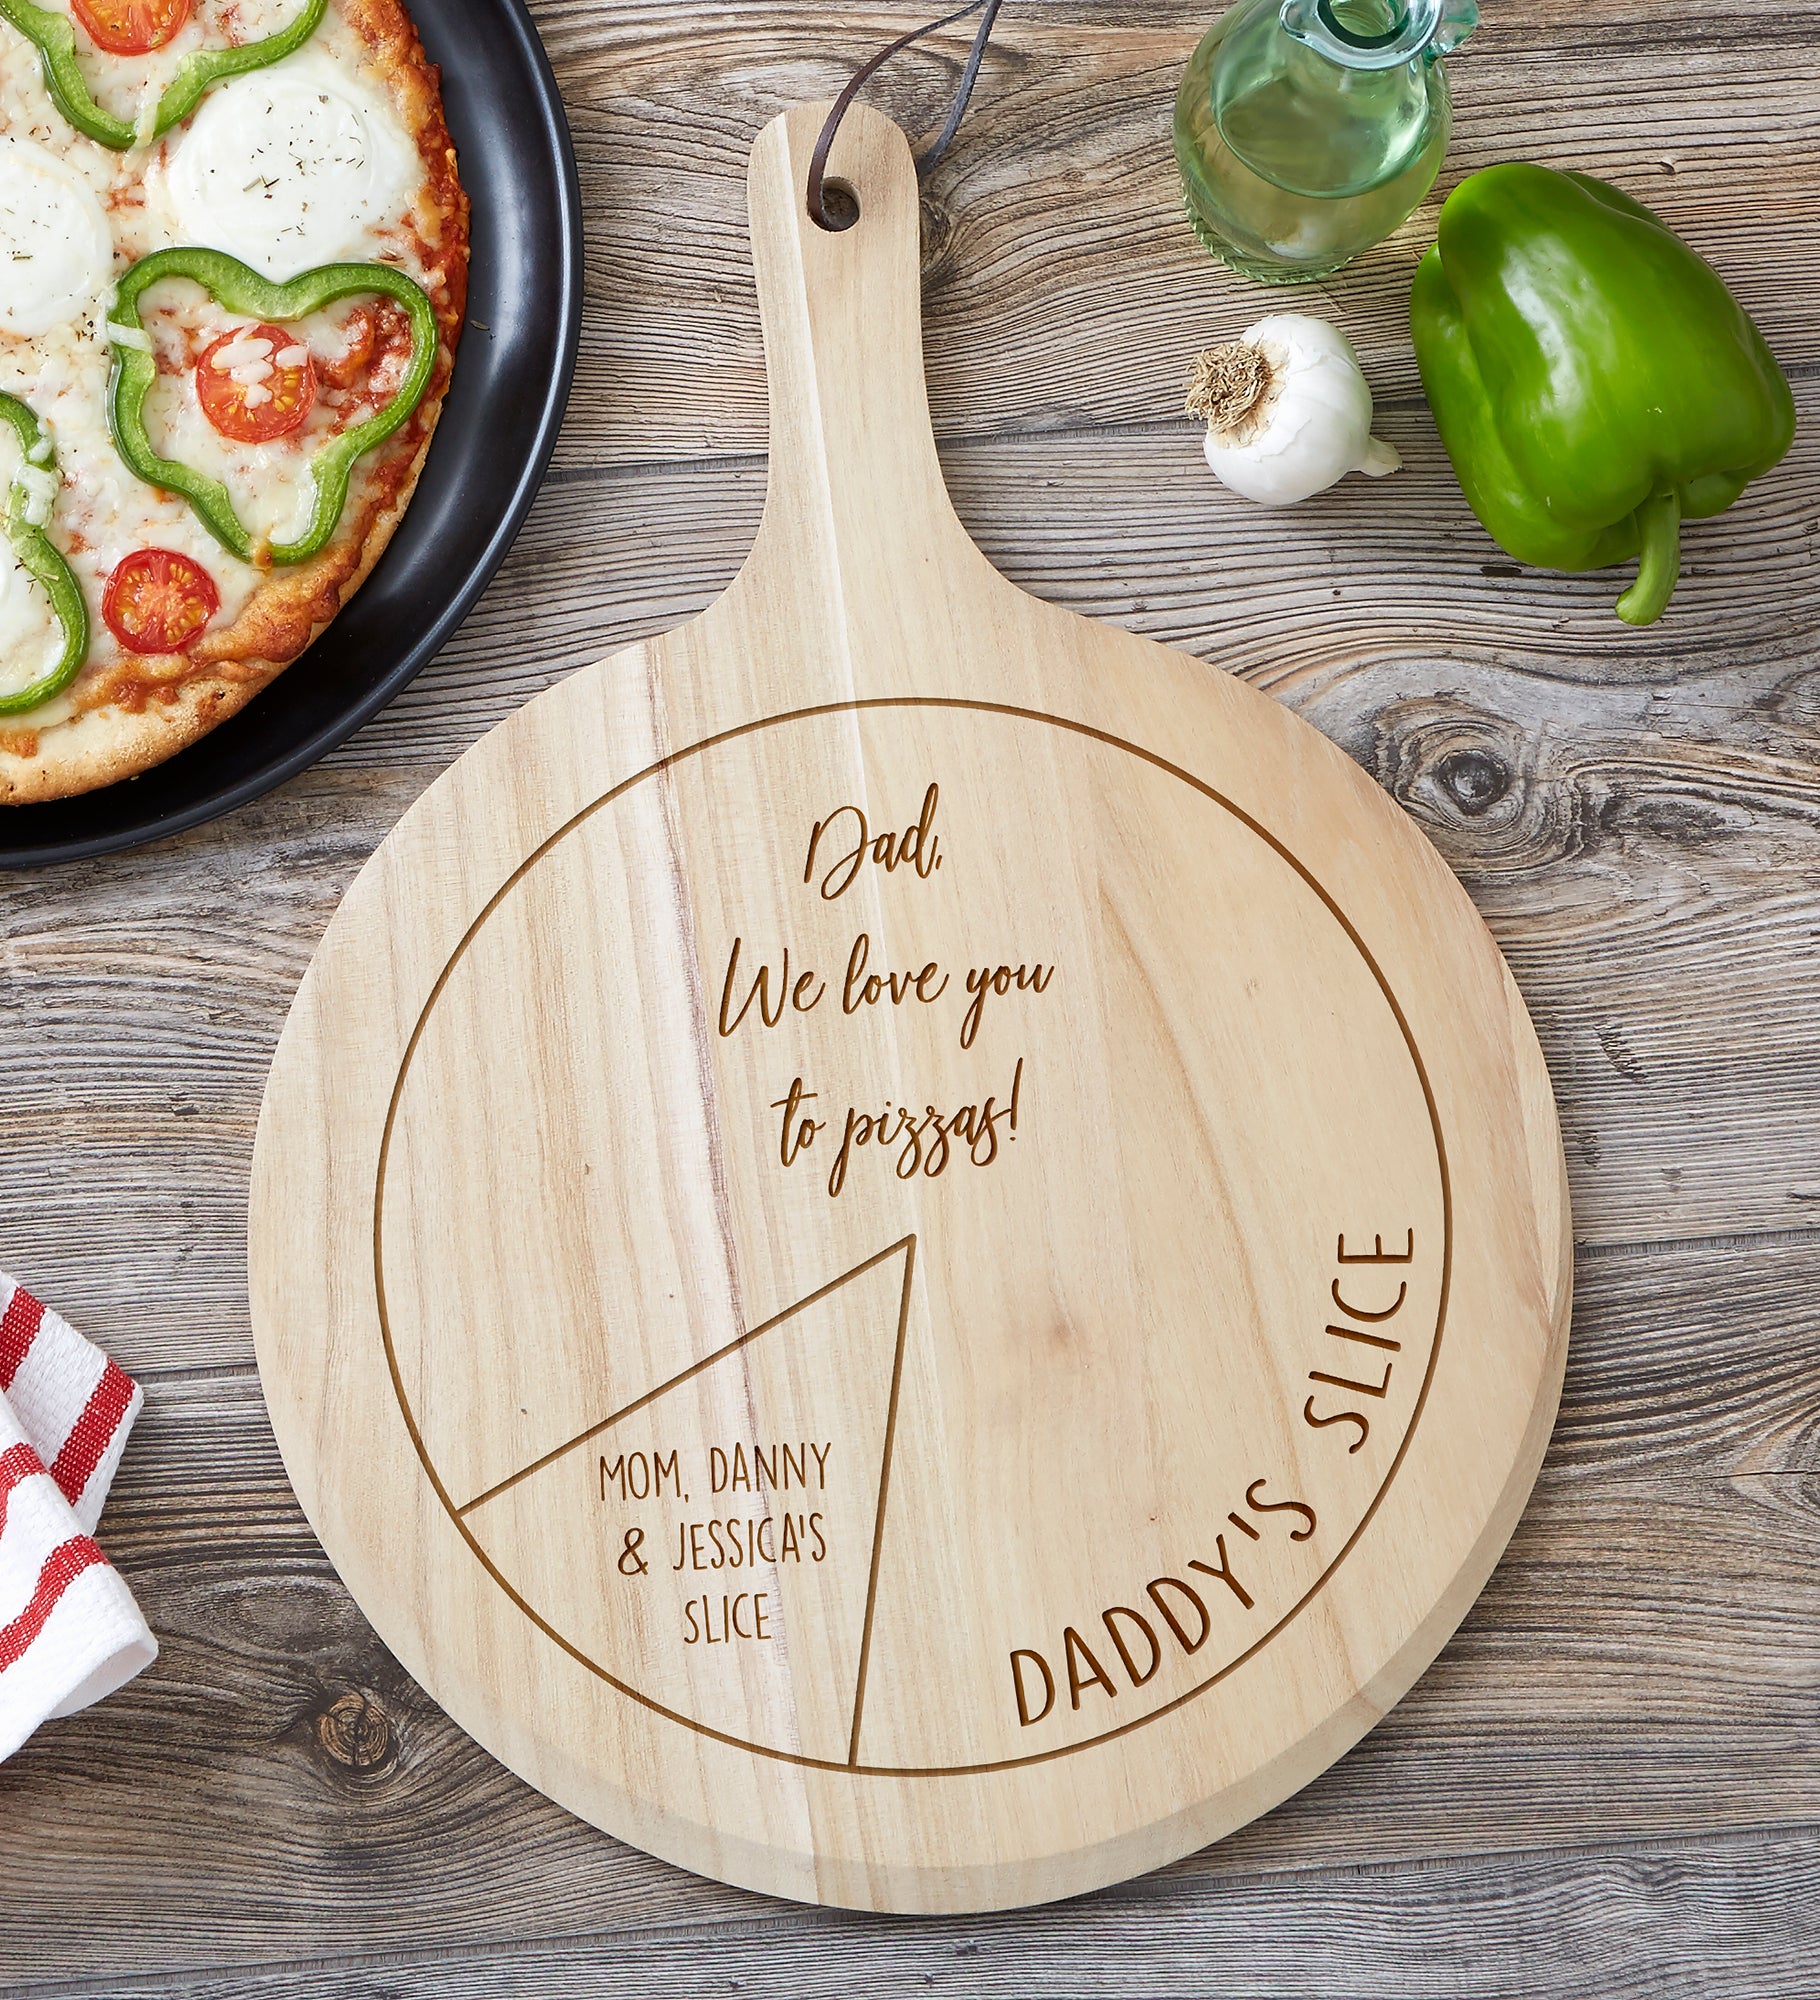 We Love You to Pizzas Personalized 3 Piece Pizza Board Gift Set